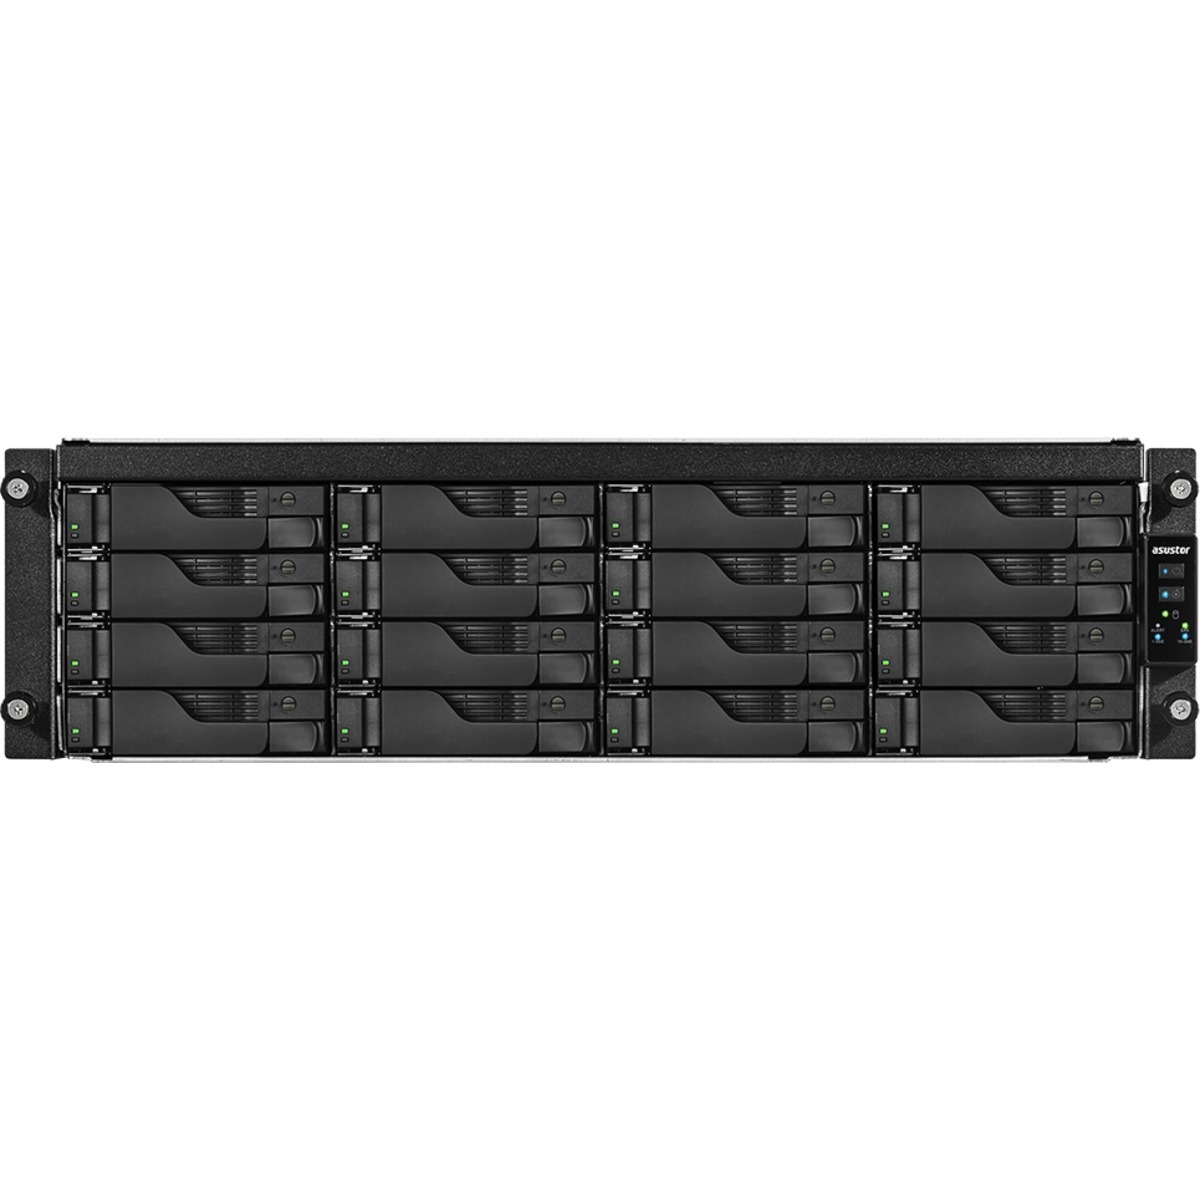 buy $13411 ASUSTOR AS7116RDX Lockerstor 16R Pro 288tb RackMount NAS - Network Attached Storage Device 16x18000gb Toshiba Enterprise Capacity MG09ACA18TE 3.5 7200rpm SATA 6Gb/s HDD ENTERPRISE Class Drives Installed - Burn-In Tested - nas headquarters buy network attached storage server device das new raid-5 free shipping usa christmas new year holiday sale AS7116RDX Lockerstor 16R Pro